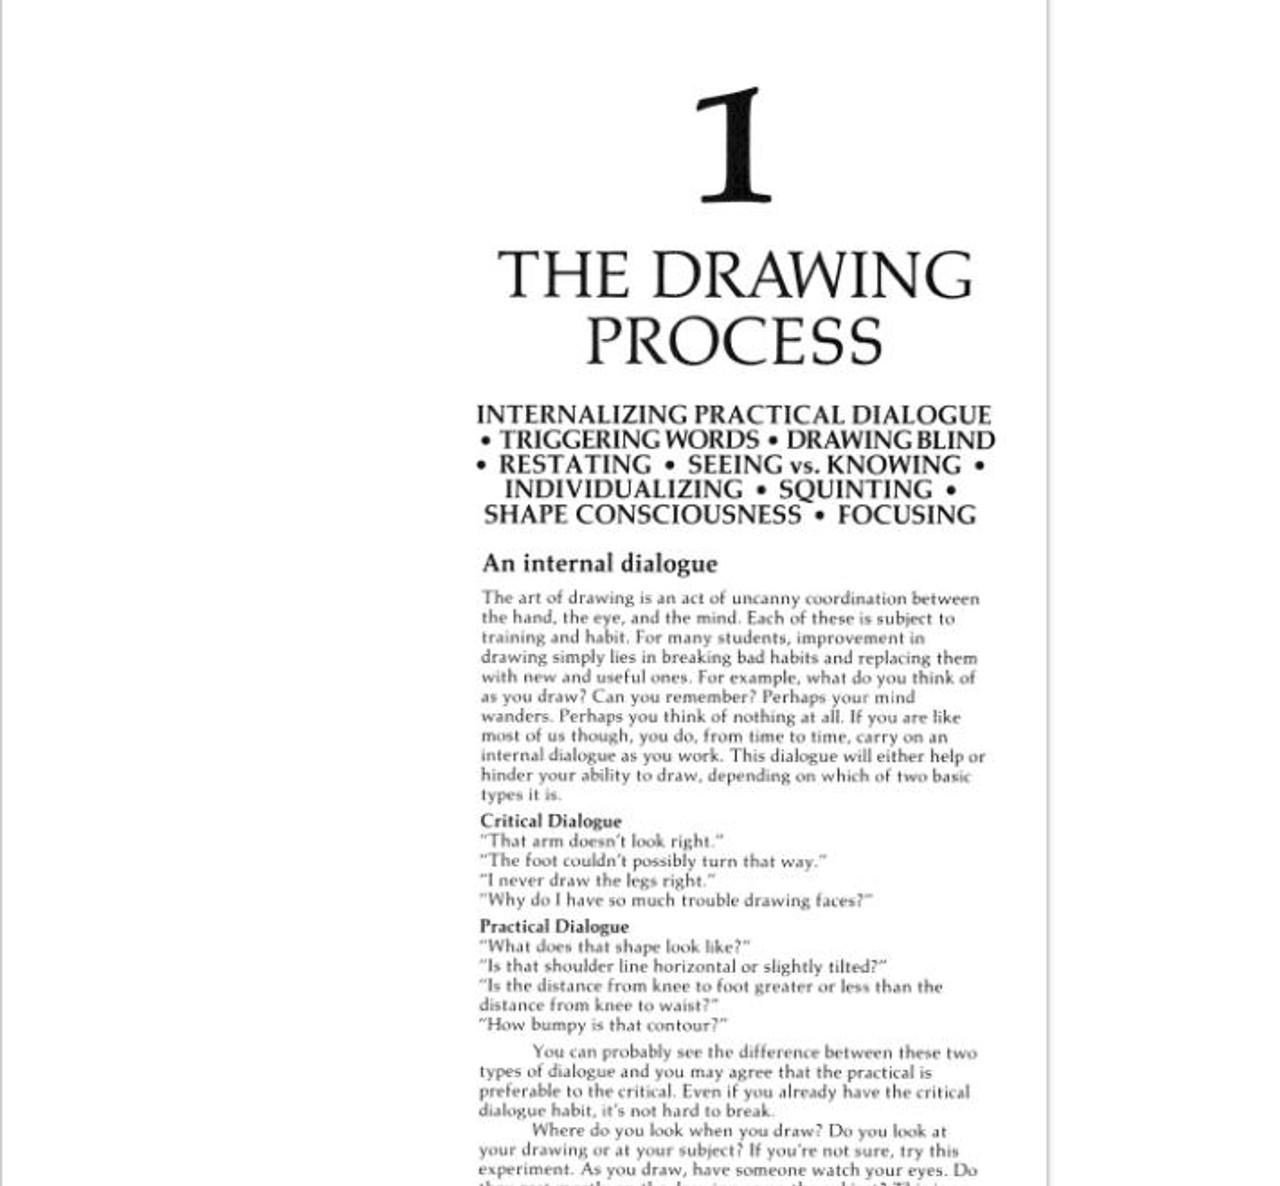 Keys to Drawing by Bert Dodson